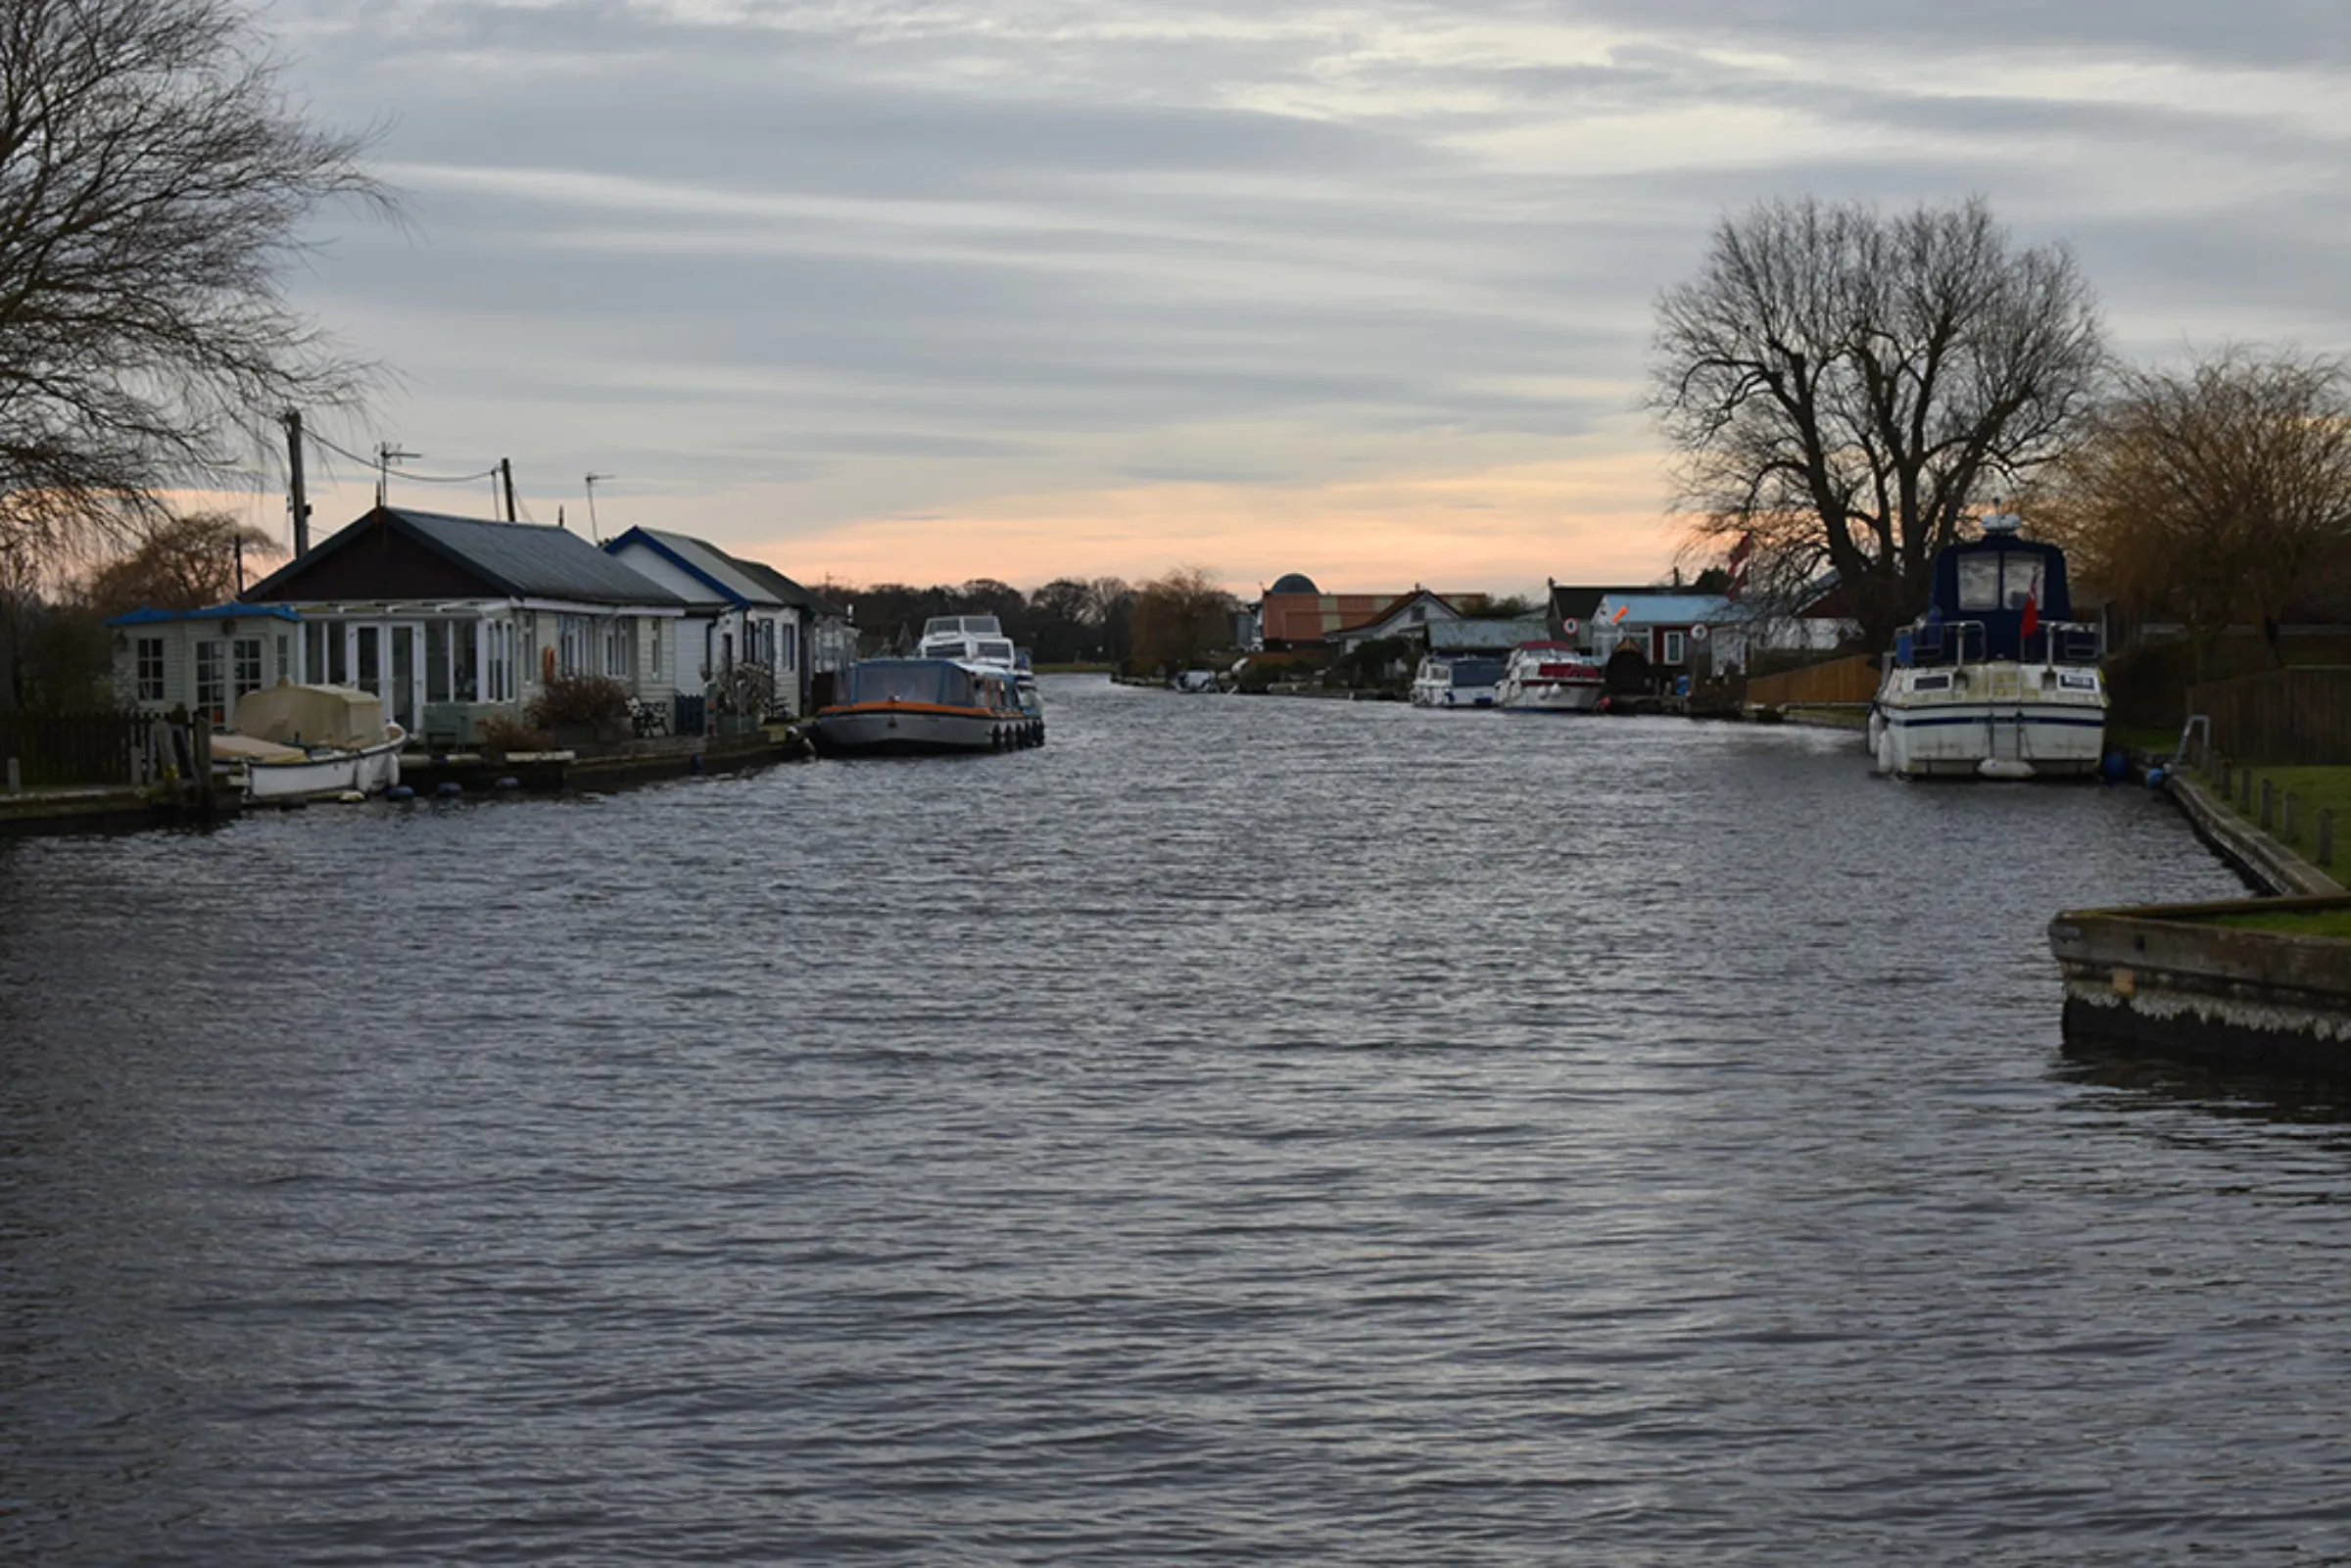 Homes and boats on the River Thurne in the village of Potter Heigham in the Broads, east England, February 10, 2023. Thousands of fish died in this stretch the Thurne in the saline incursion in September 2022. Thomson Reuters Foundation/Rachel Parsons